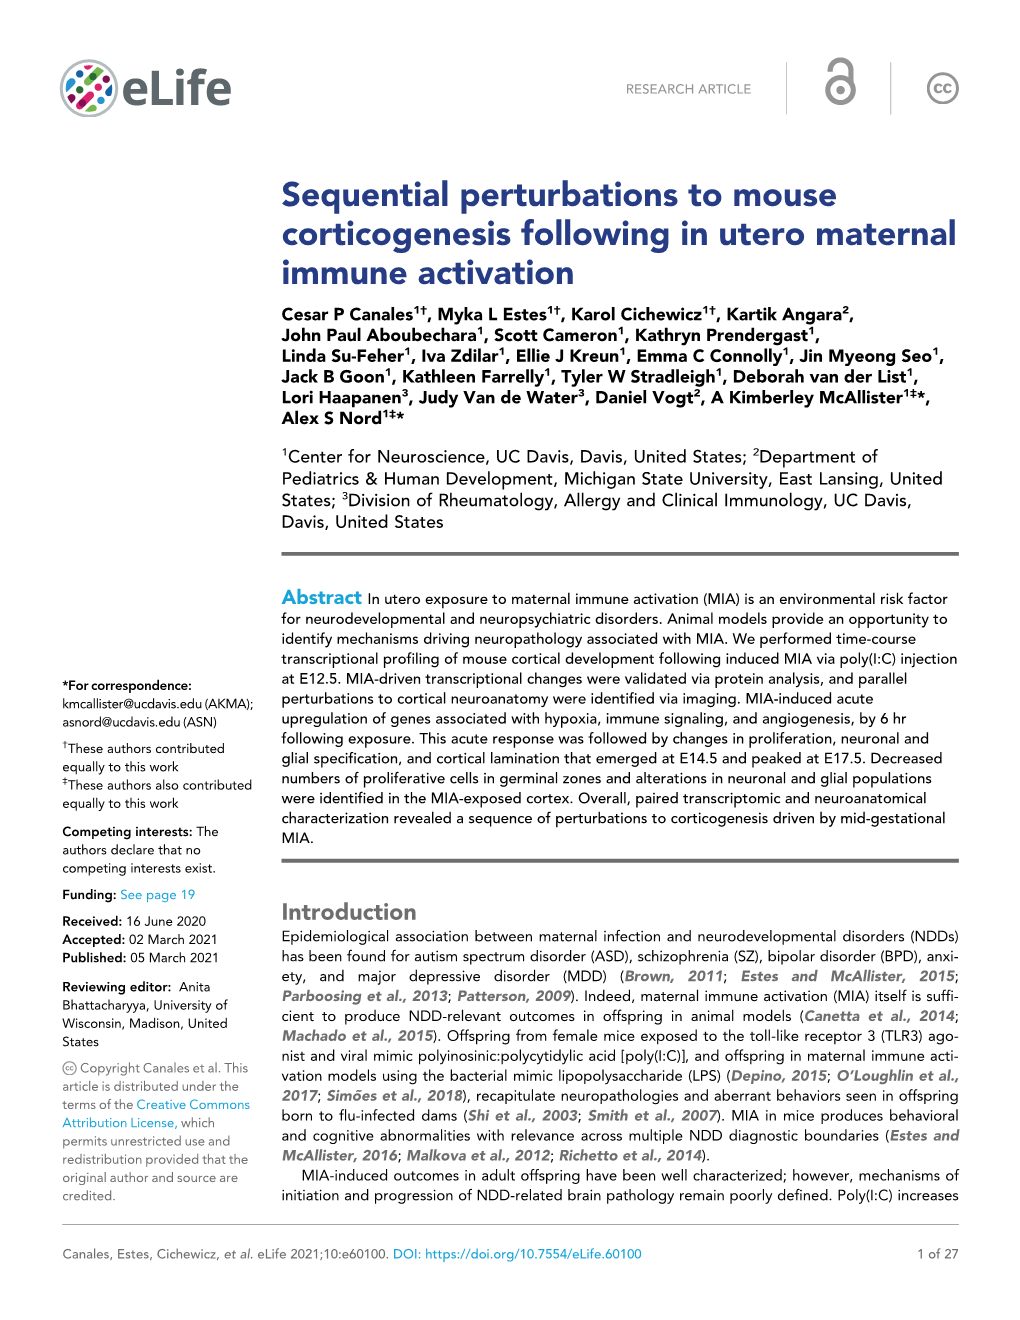 Sequential Perturbations to Mouse Corticogenesis Following in Utero